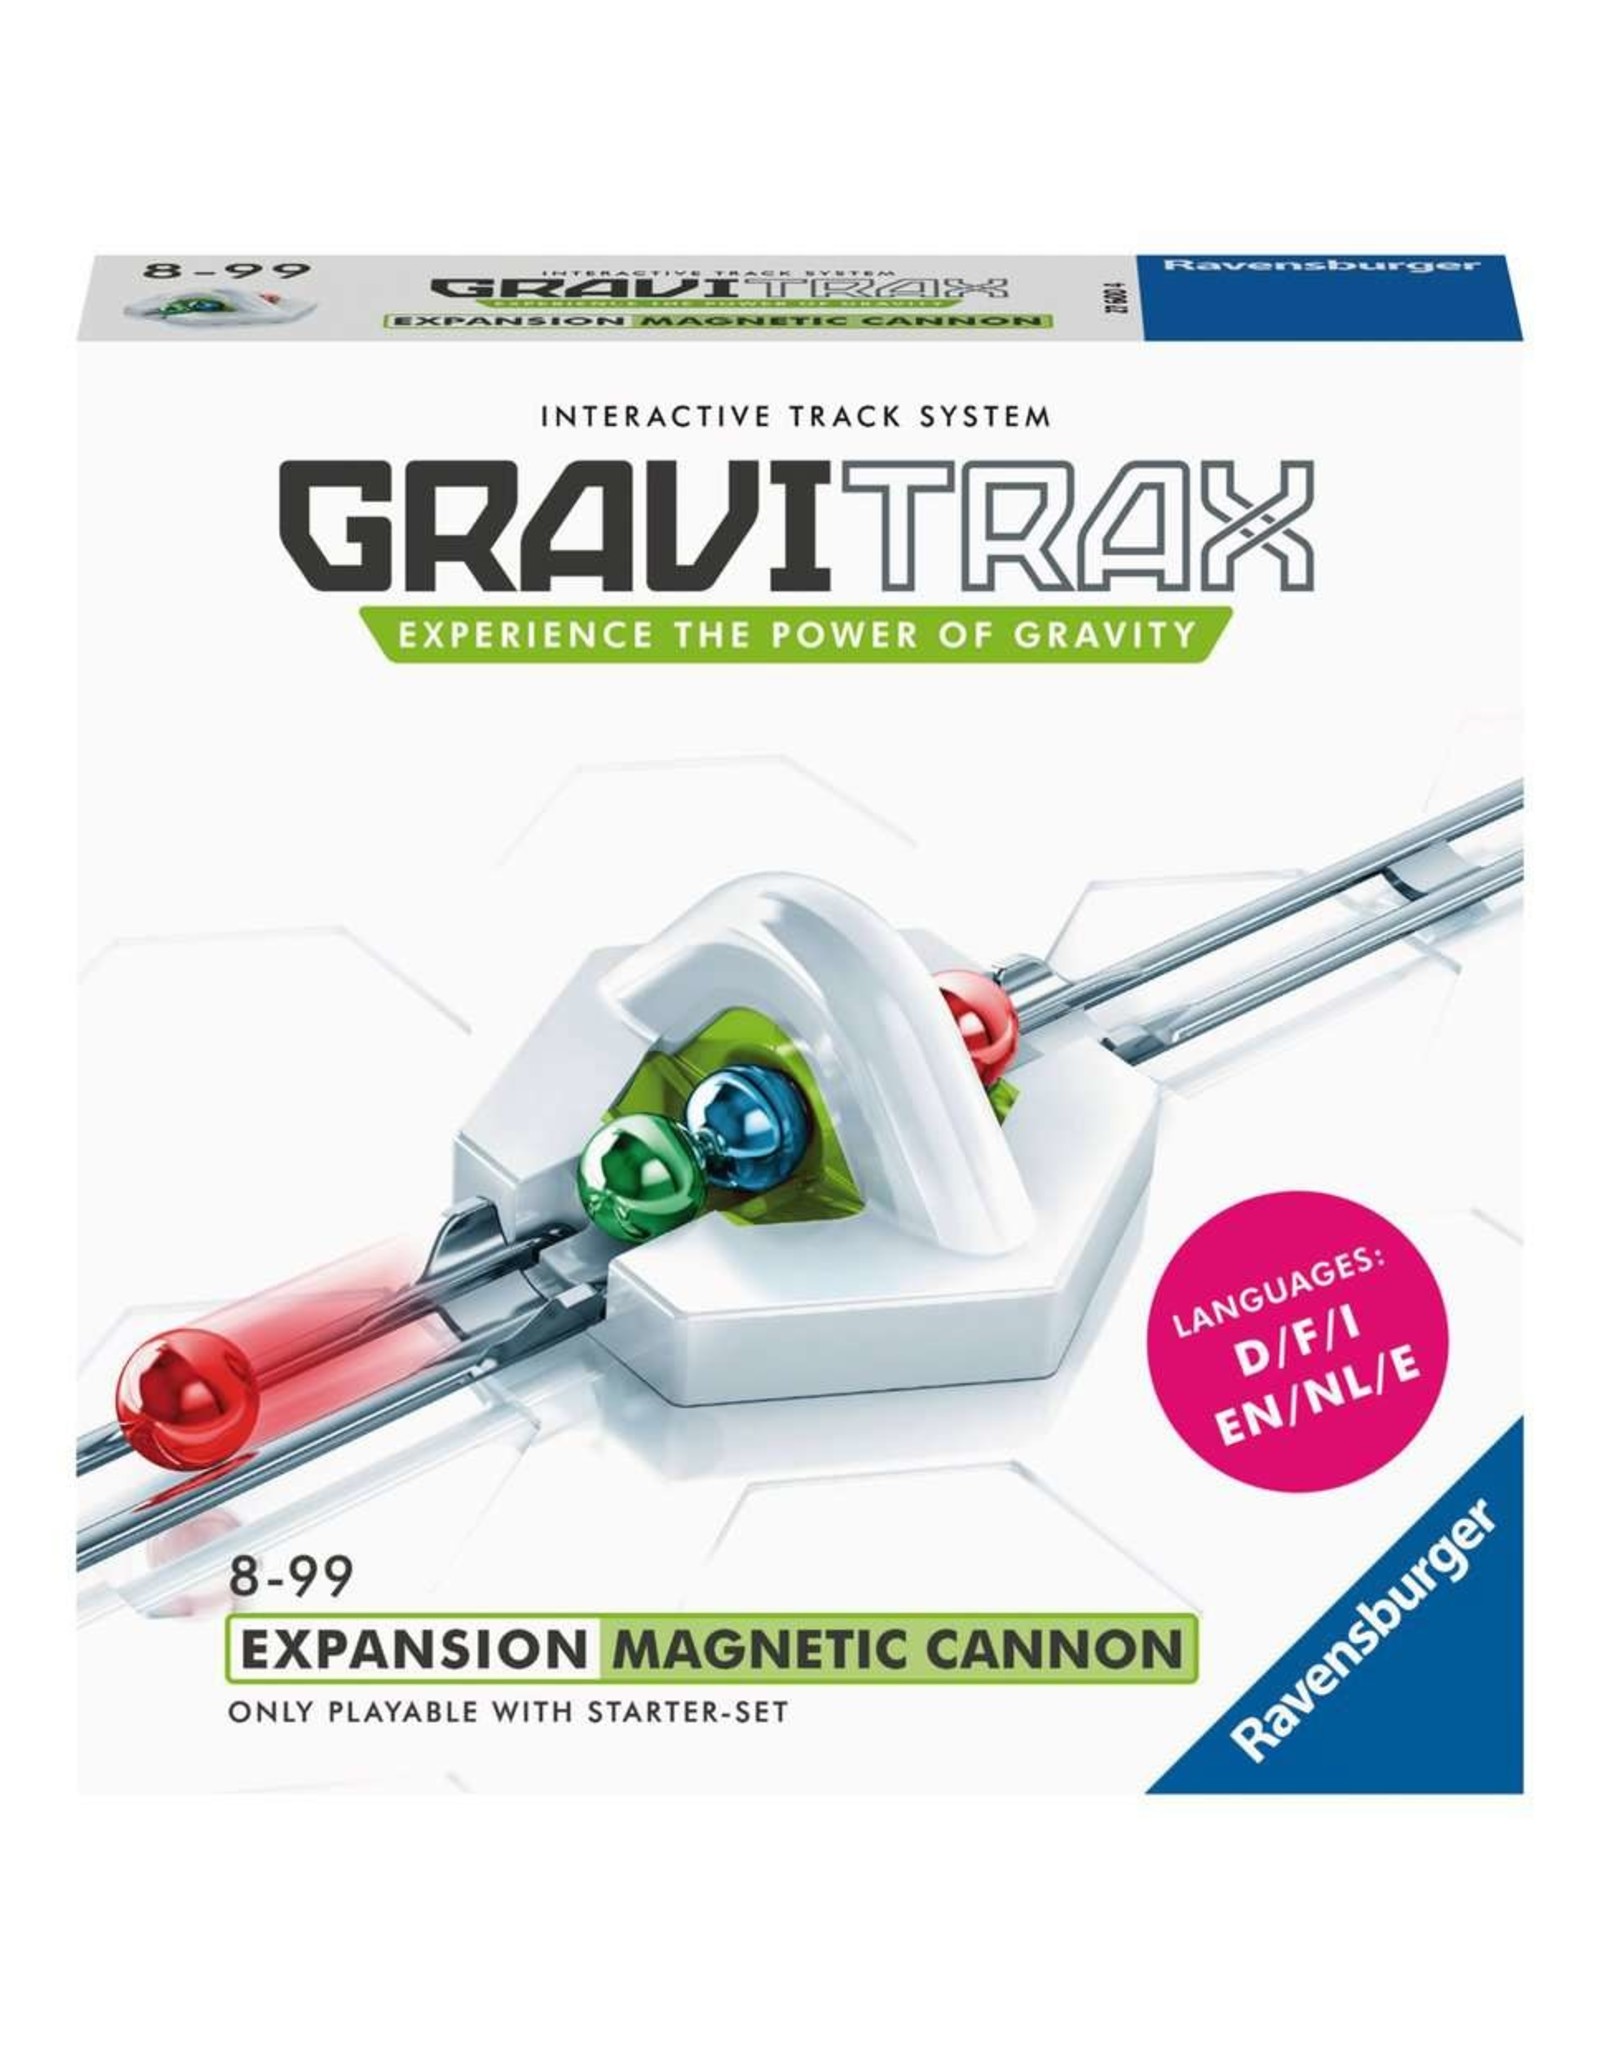 Ravensburger GraviTrax Extension: Magnetic Cannon